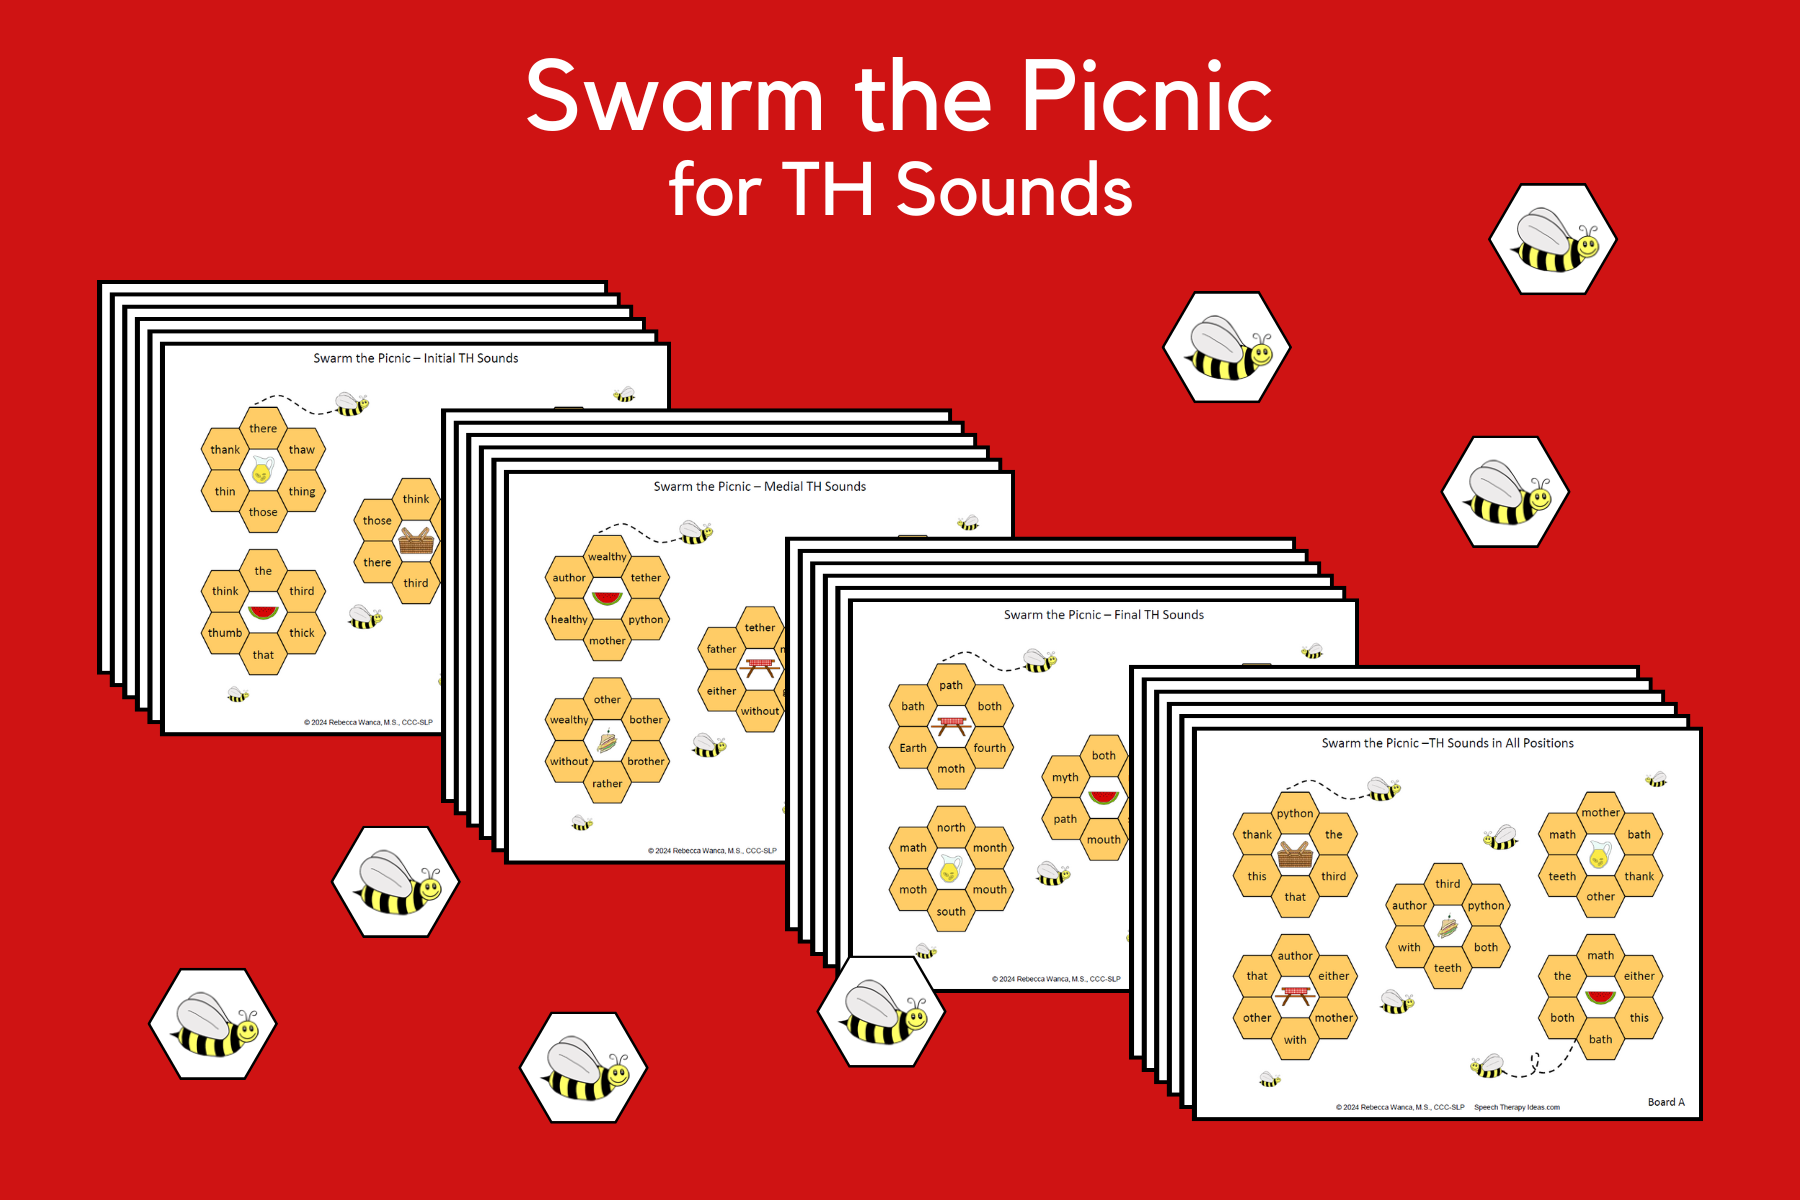 Swarm the Picnic for TH Sounds